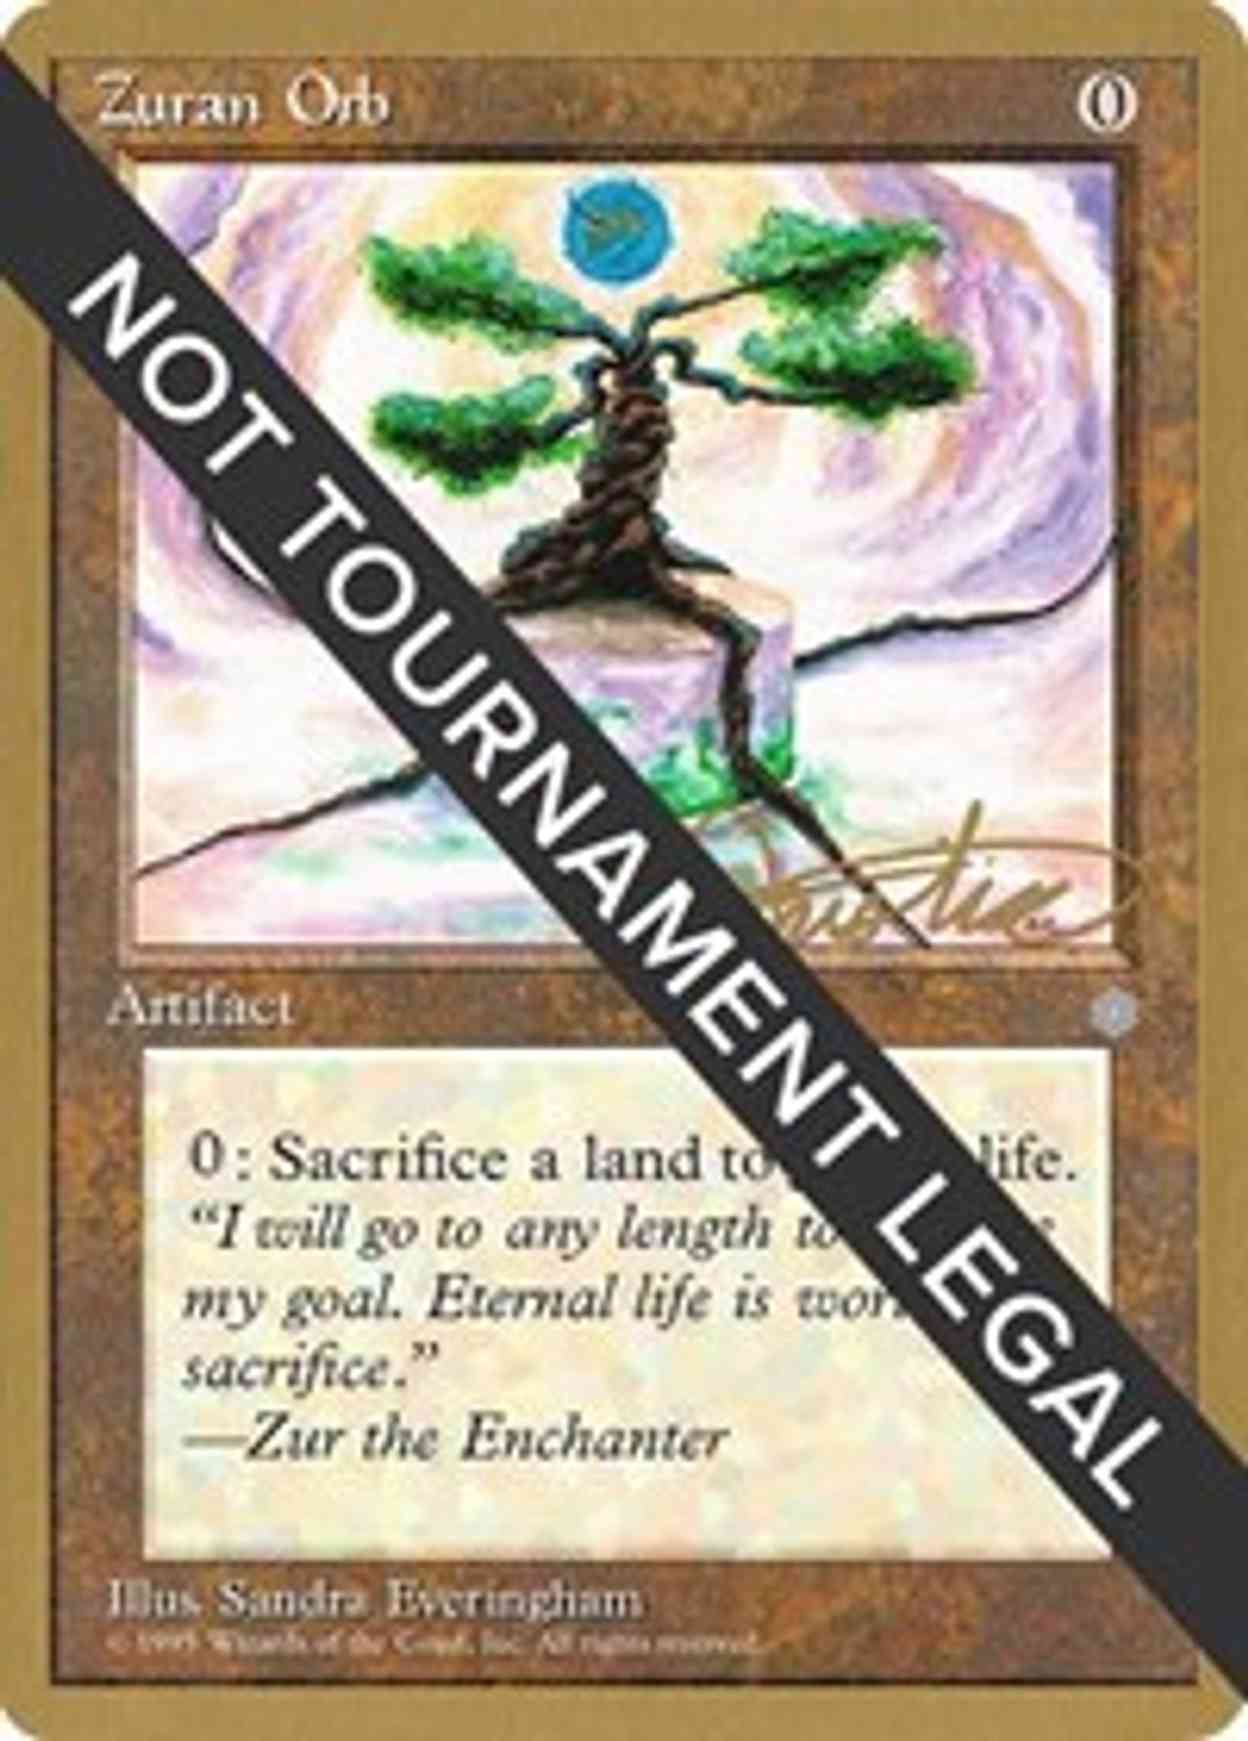 Zuran Orb - 1996 Mark Justice (ICE) magic card front